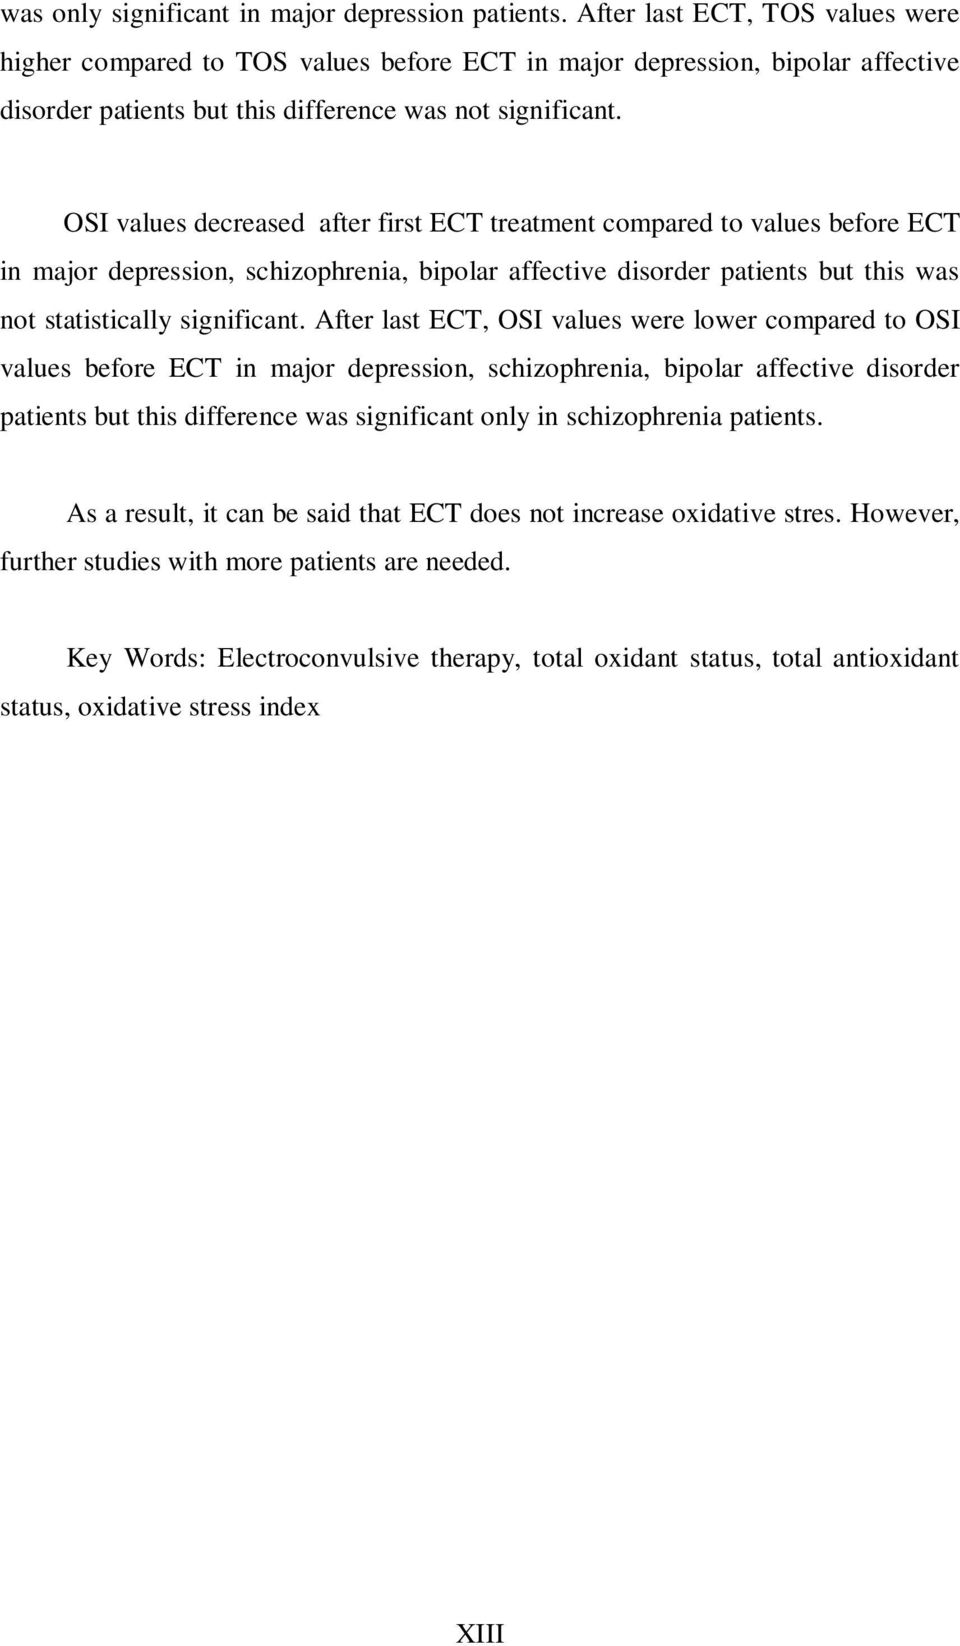 OSI values decreased after first ECT treatment compared to values before ECT in major depression, schizophrenia, bipolar affective disorder patients but this was not statistically significant.